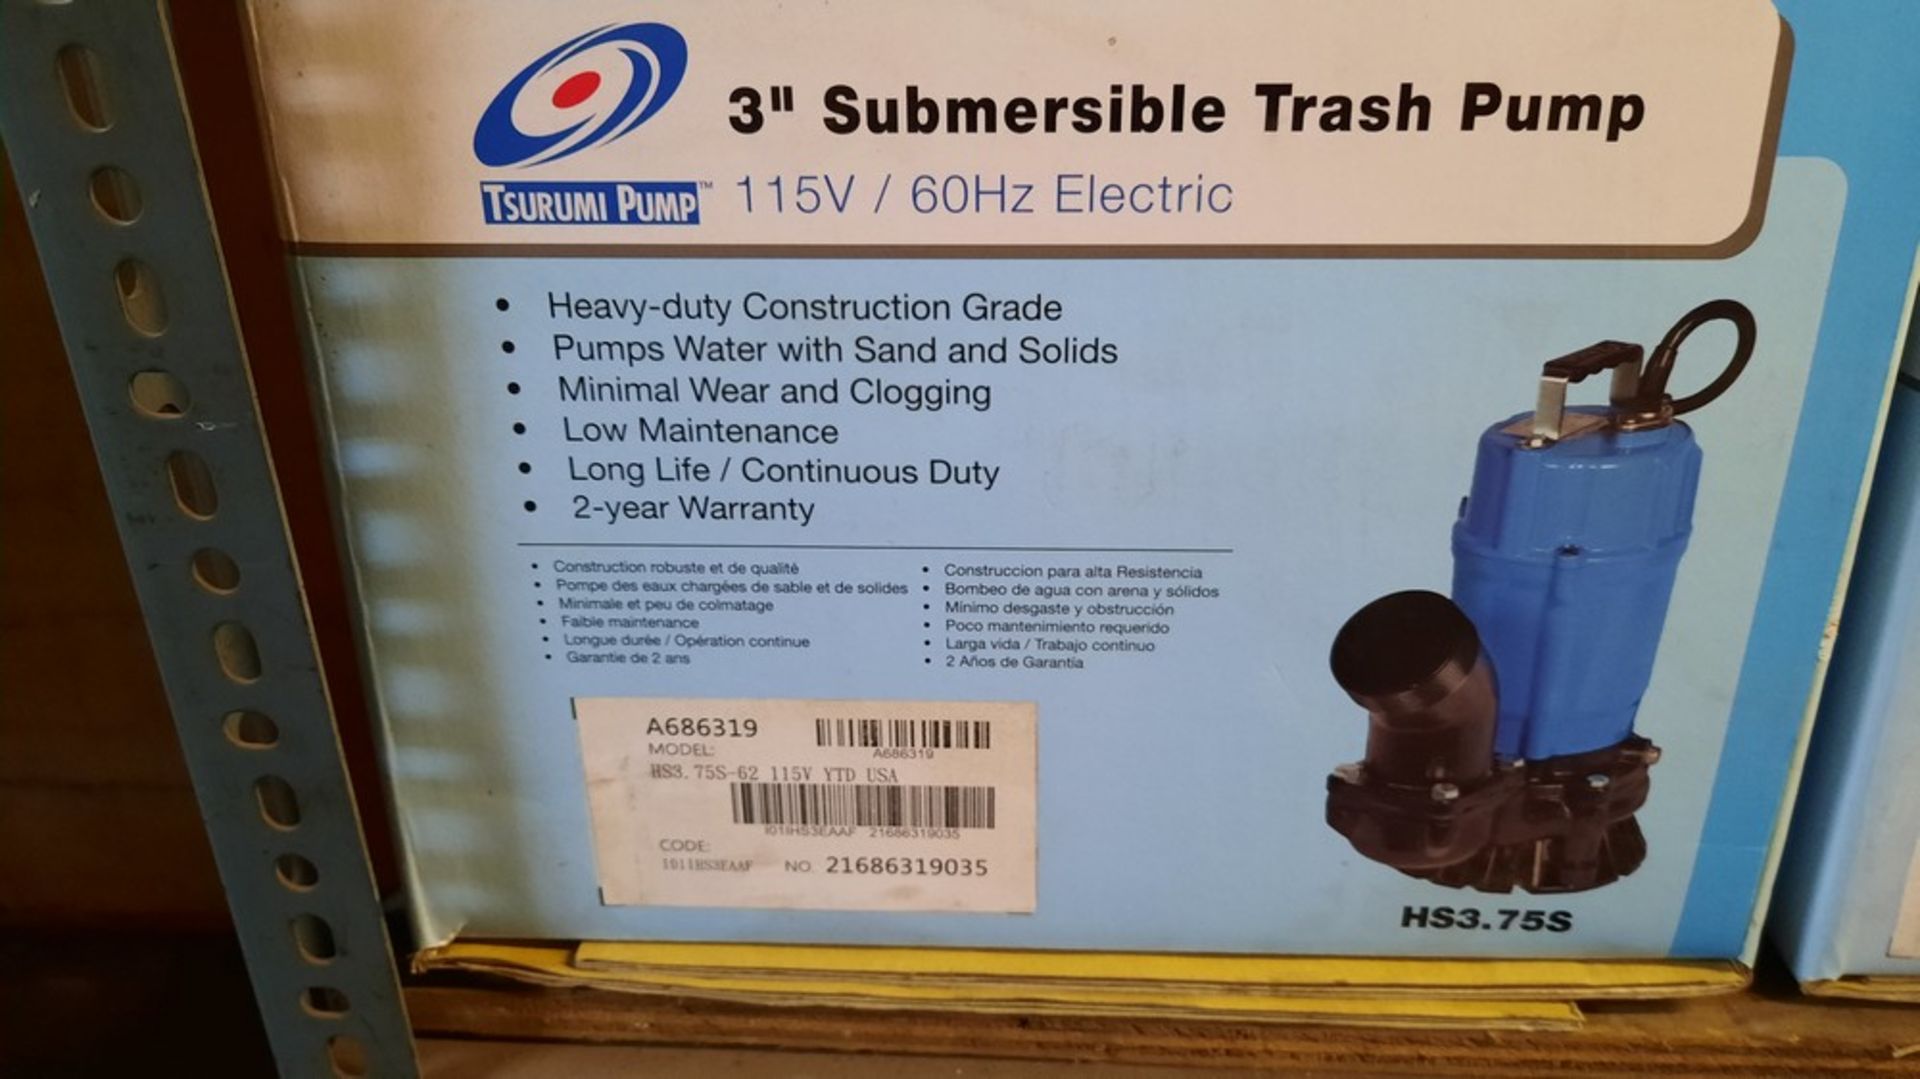 3'' Submersible Trash Pump (see photo for specifications)